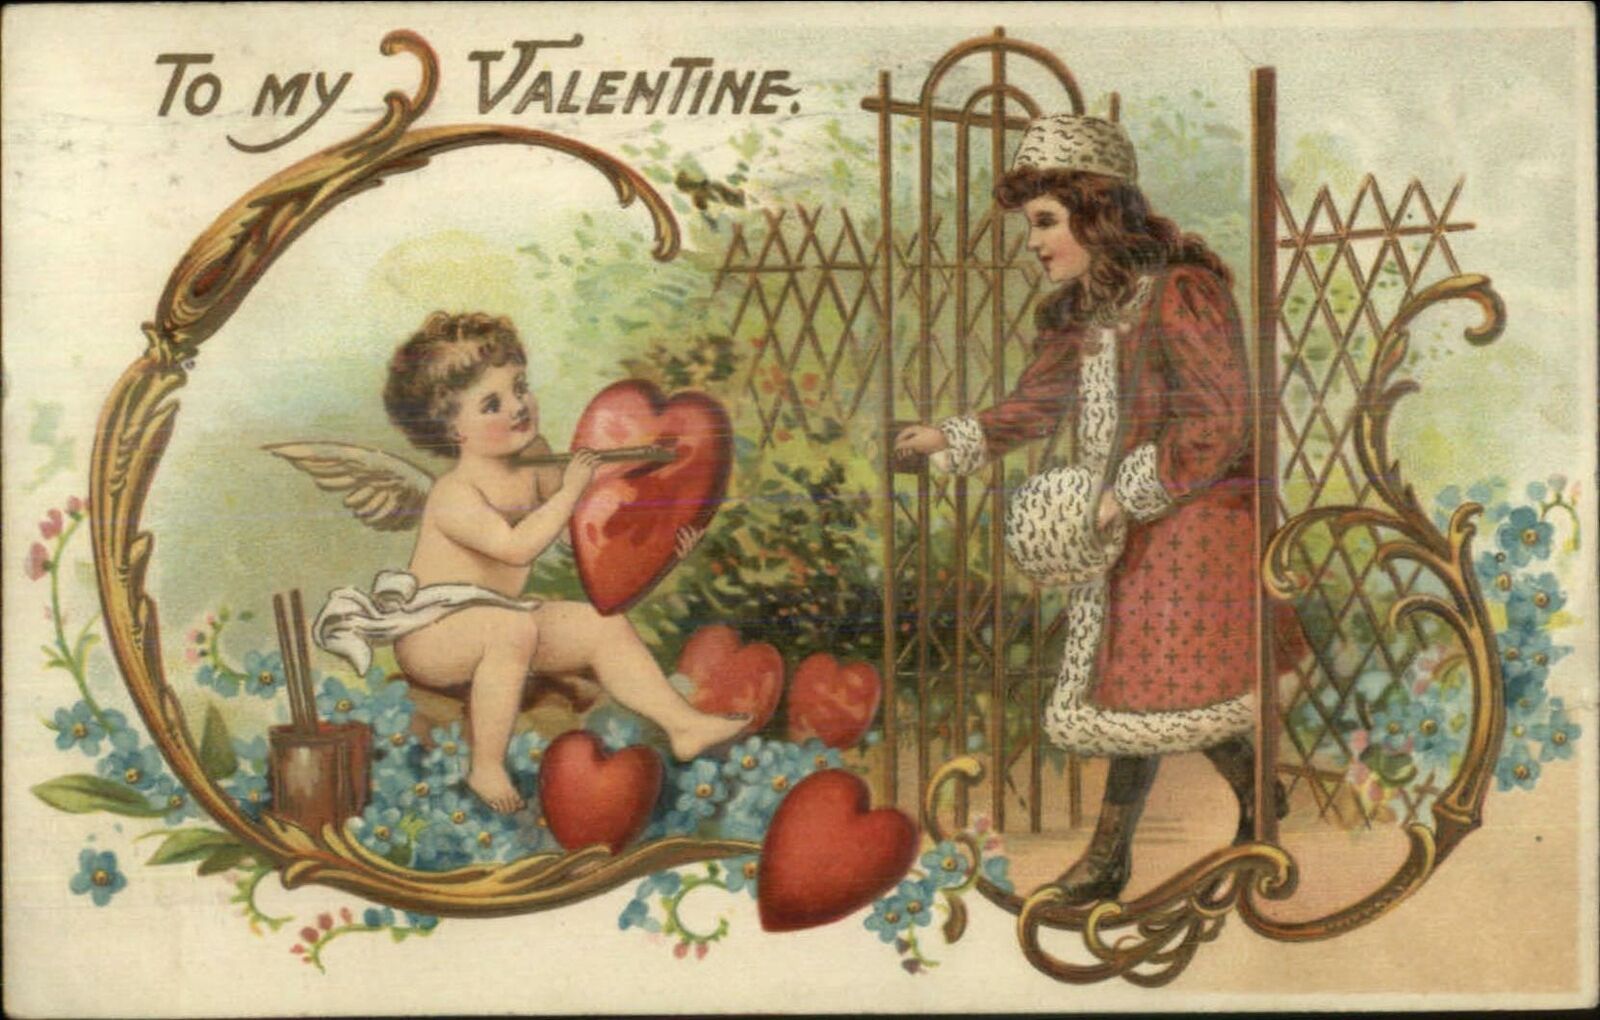 Valentine - Cupid Painting Hearts Visited by Girl c1910 Postcard